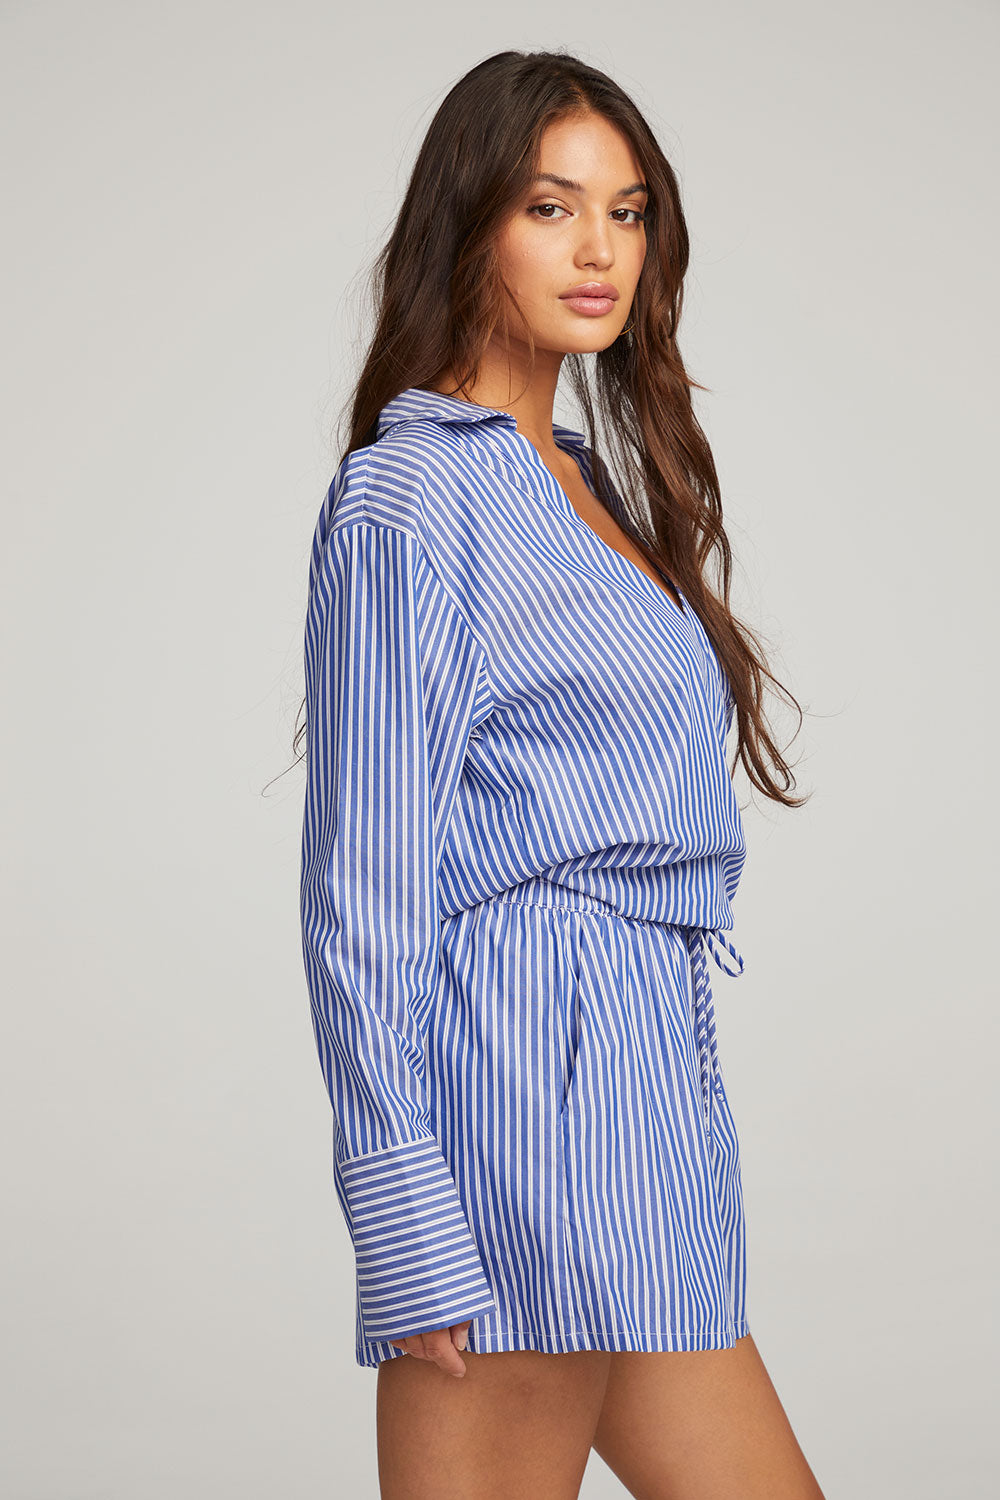 Haley Marmont Stripe Blouse WOMENS chaserbrand